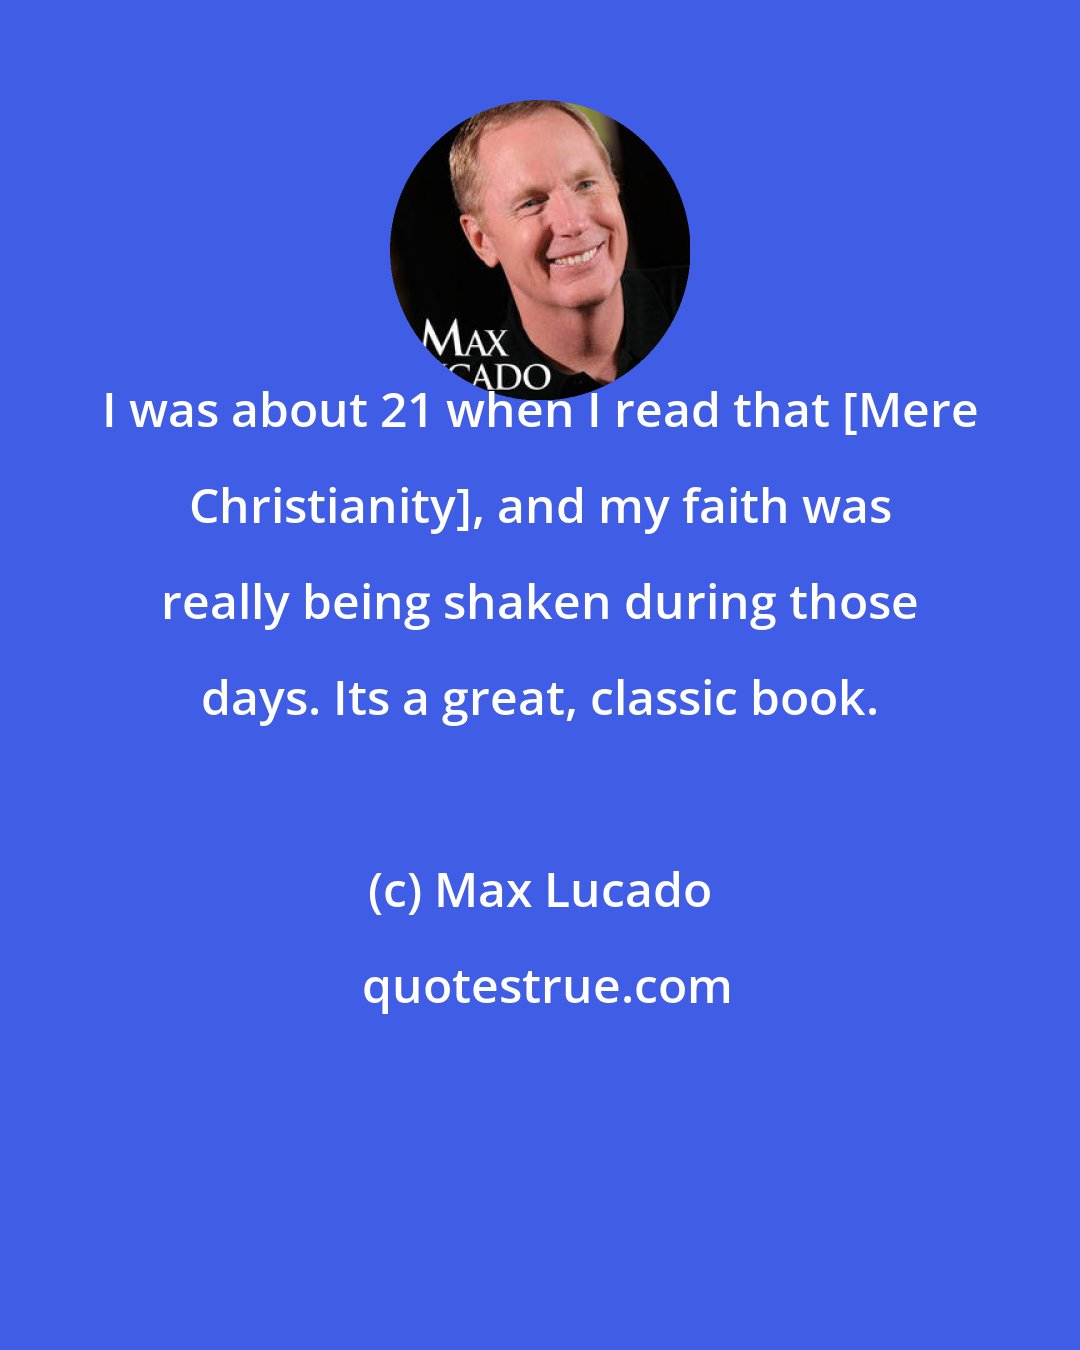 Max Lucado: I was about 21 when I read that [Mere Christianity], and my faith was really being shaken during those days. Its a great, classic book.